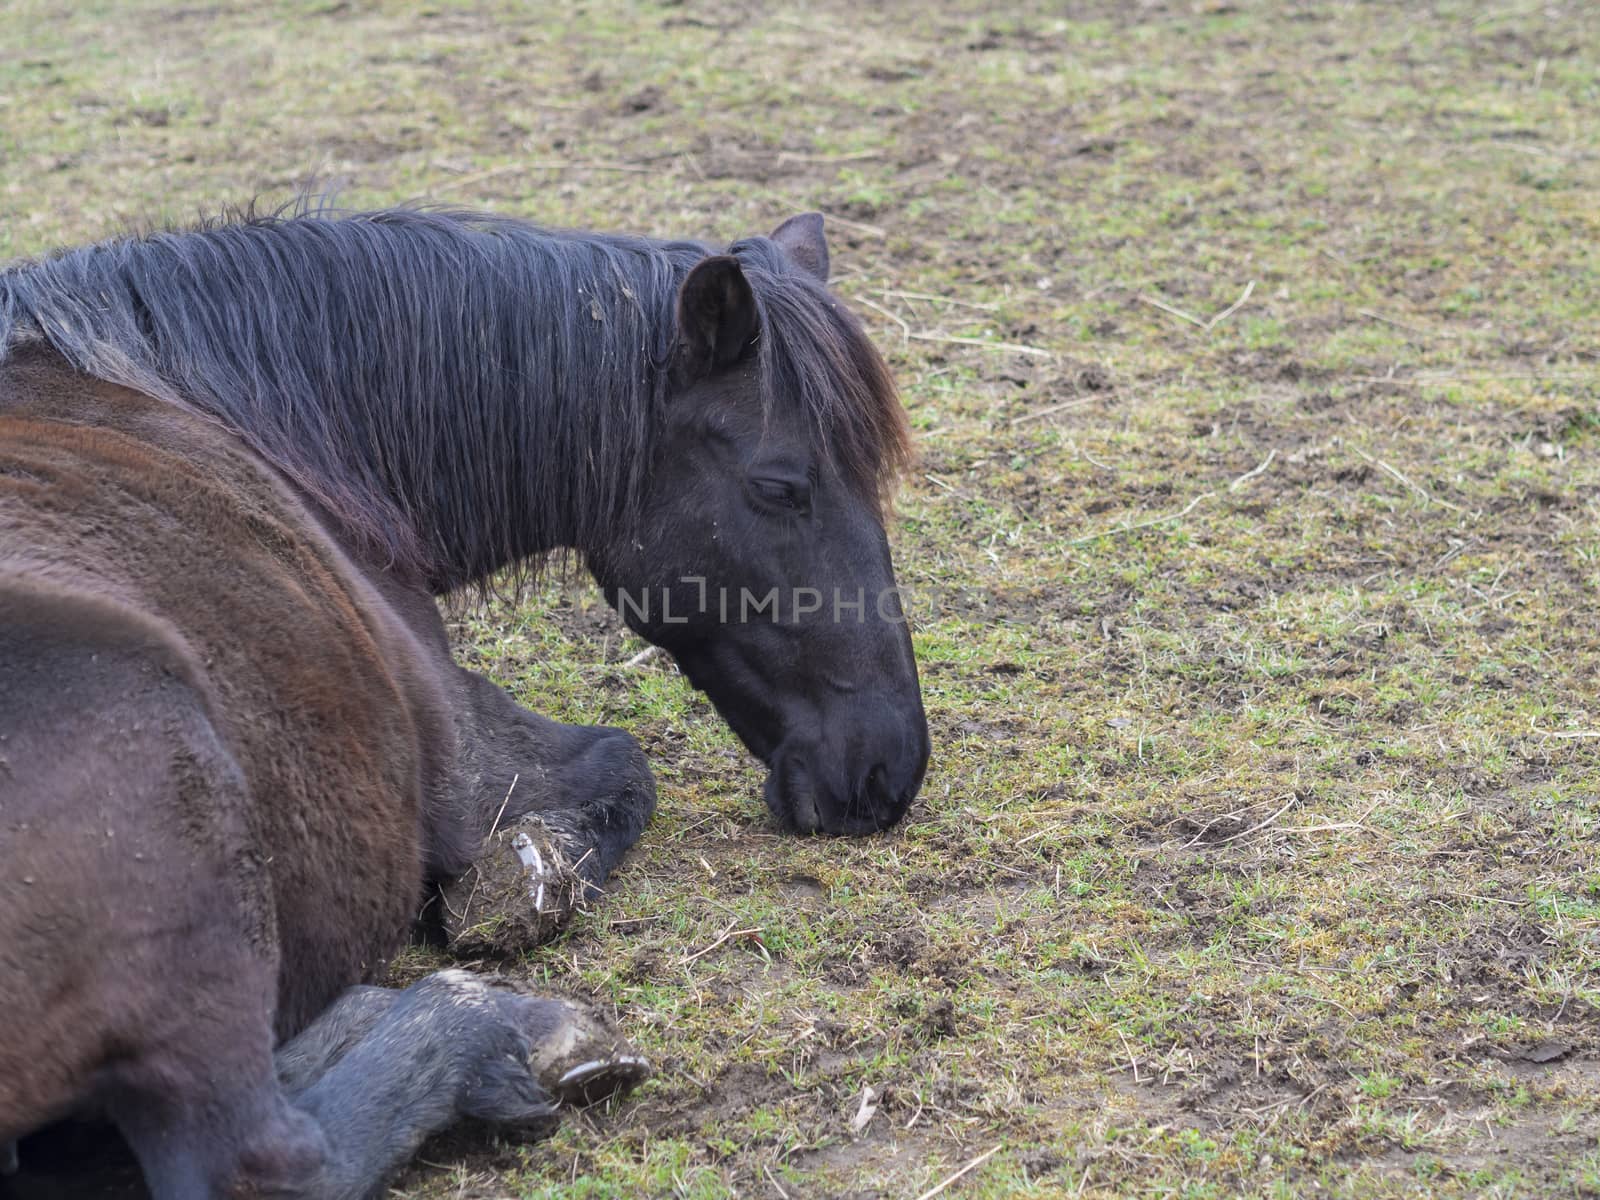 close up dirty ginger brown horse lying on mug green grass meadow, sad or ill look, selective focus on head